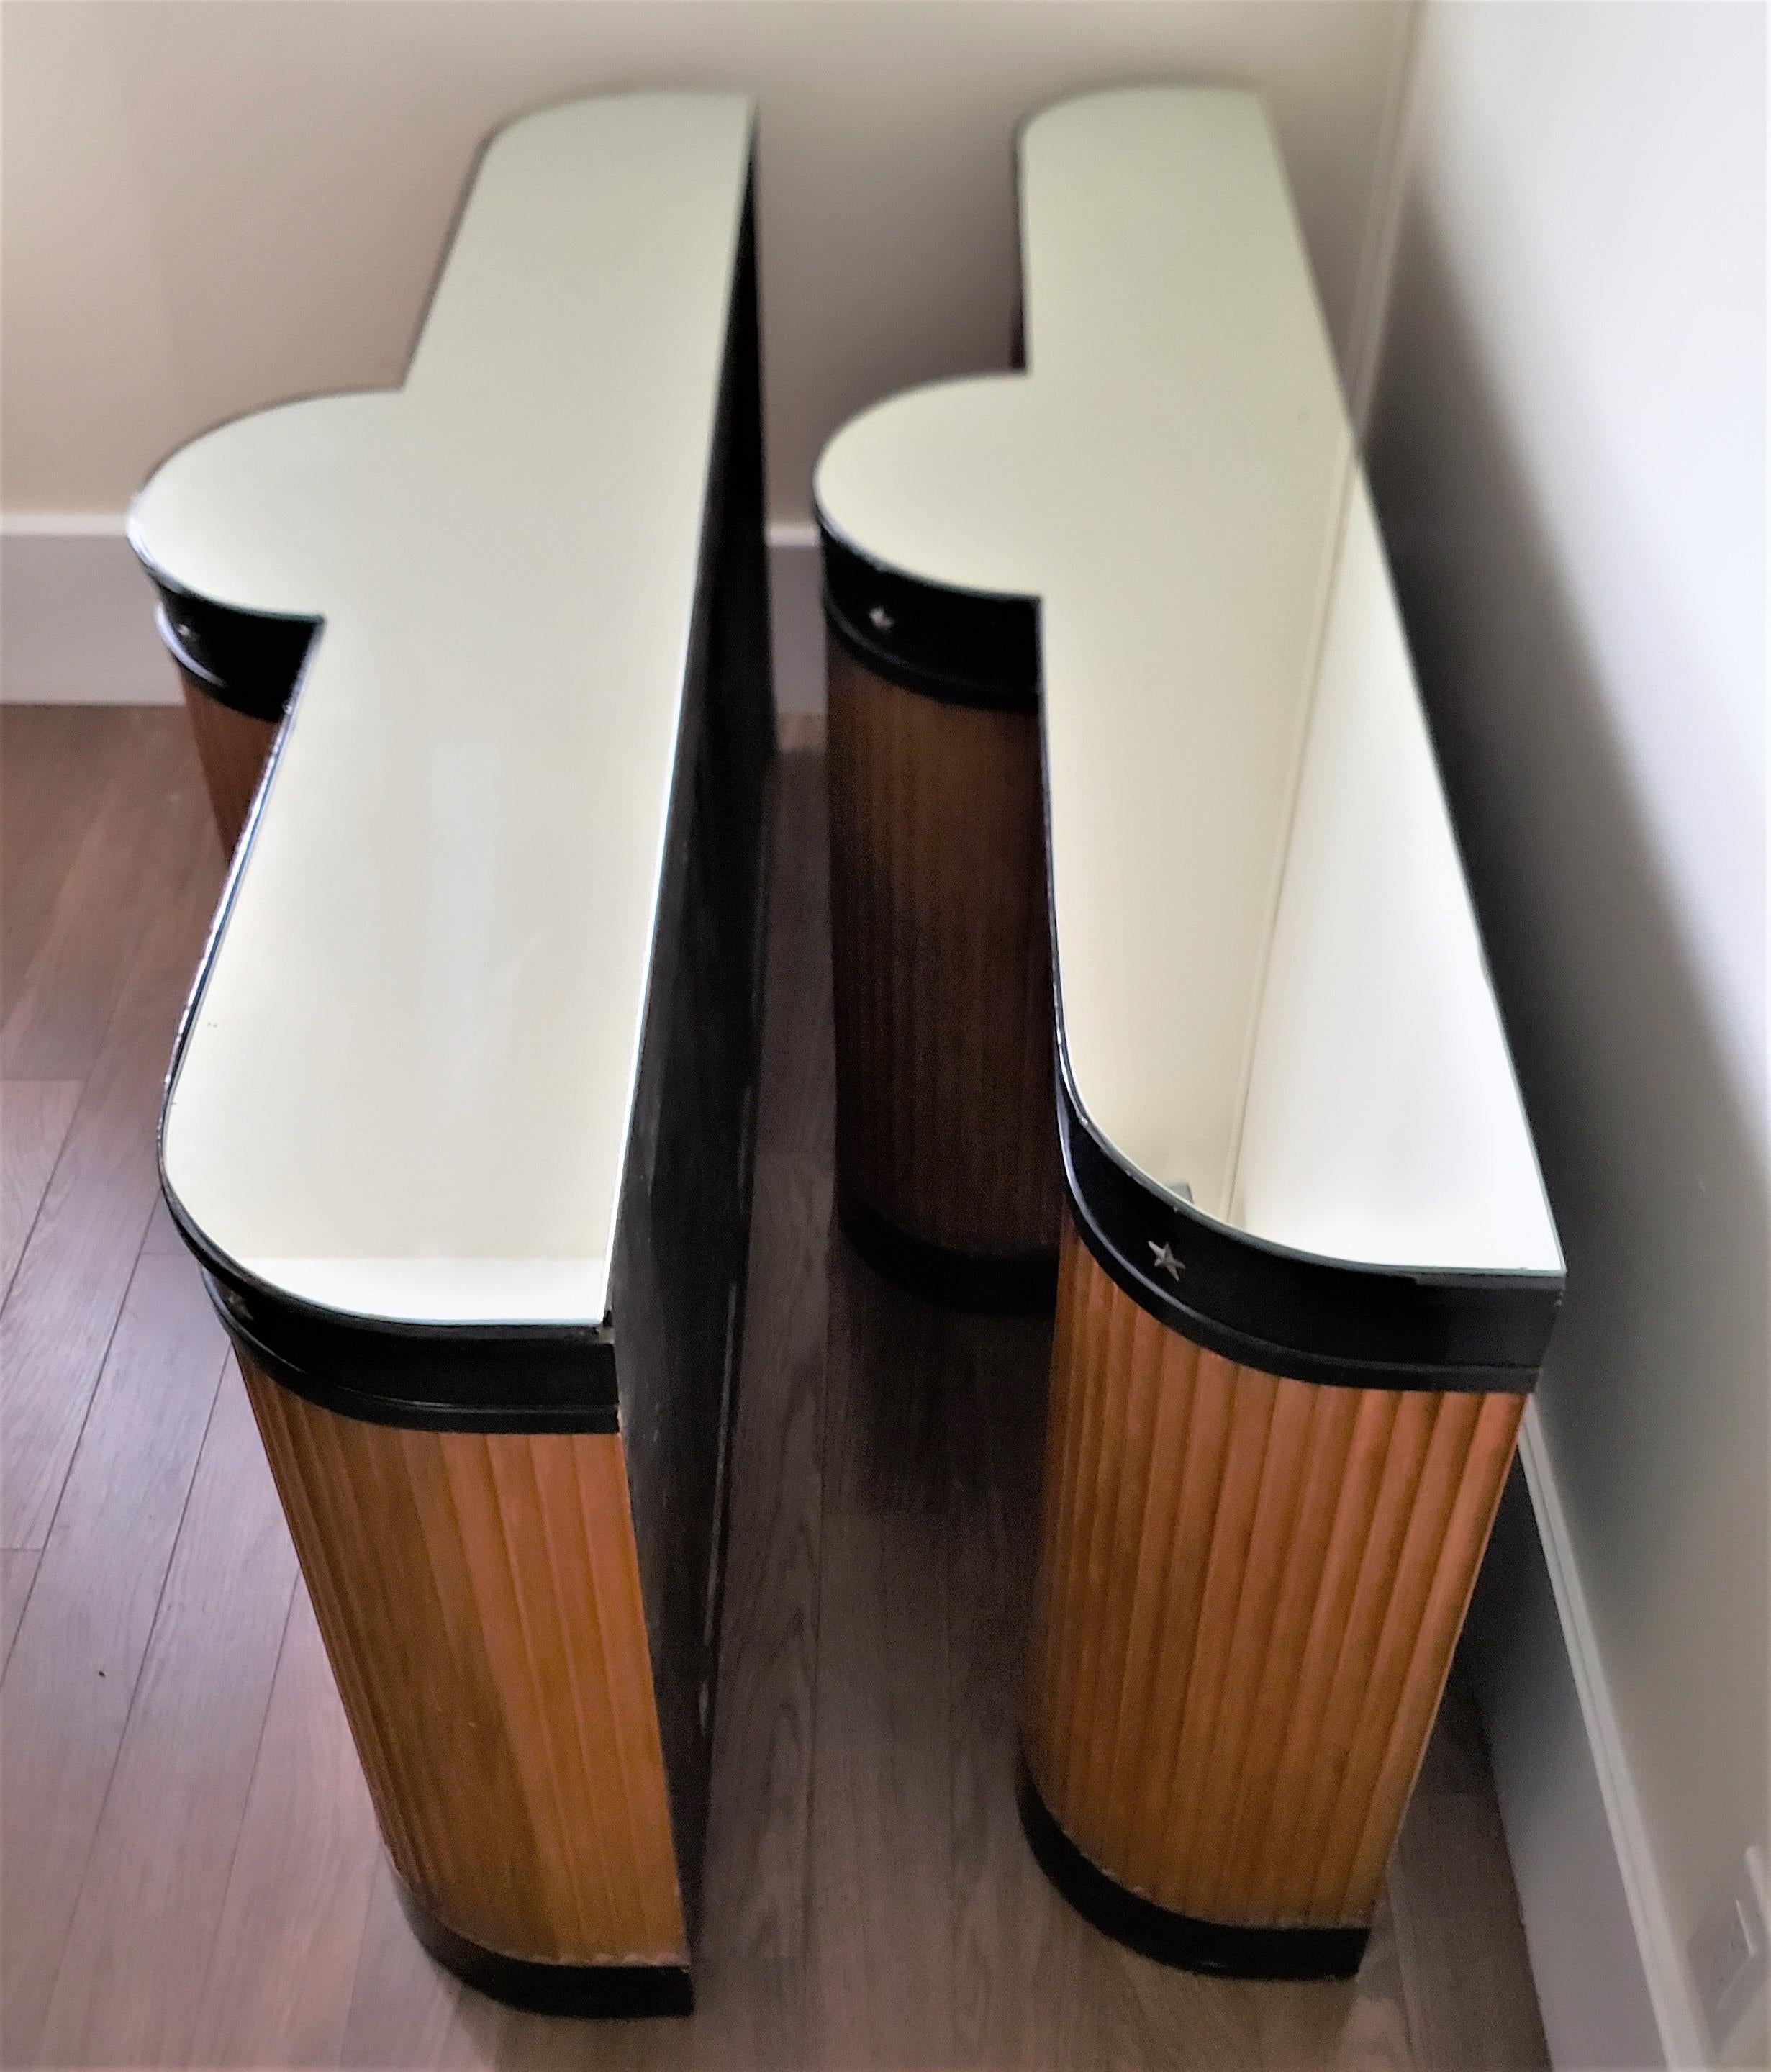 Pair of Art Deco Column Styled Console Tables or Stands with Mirrored Tops For Sale 1